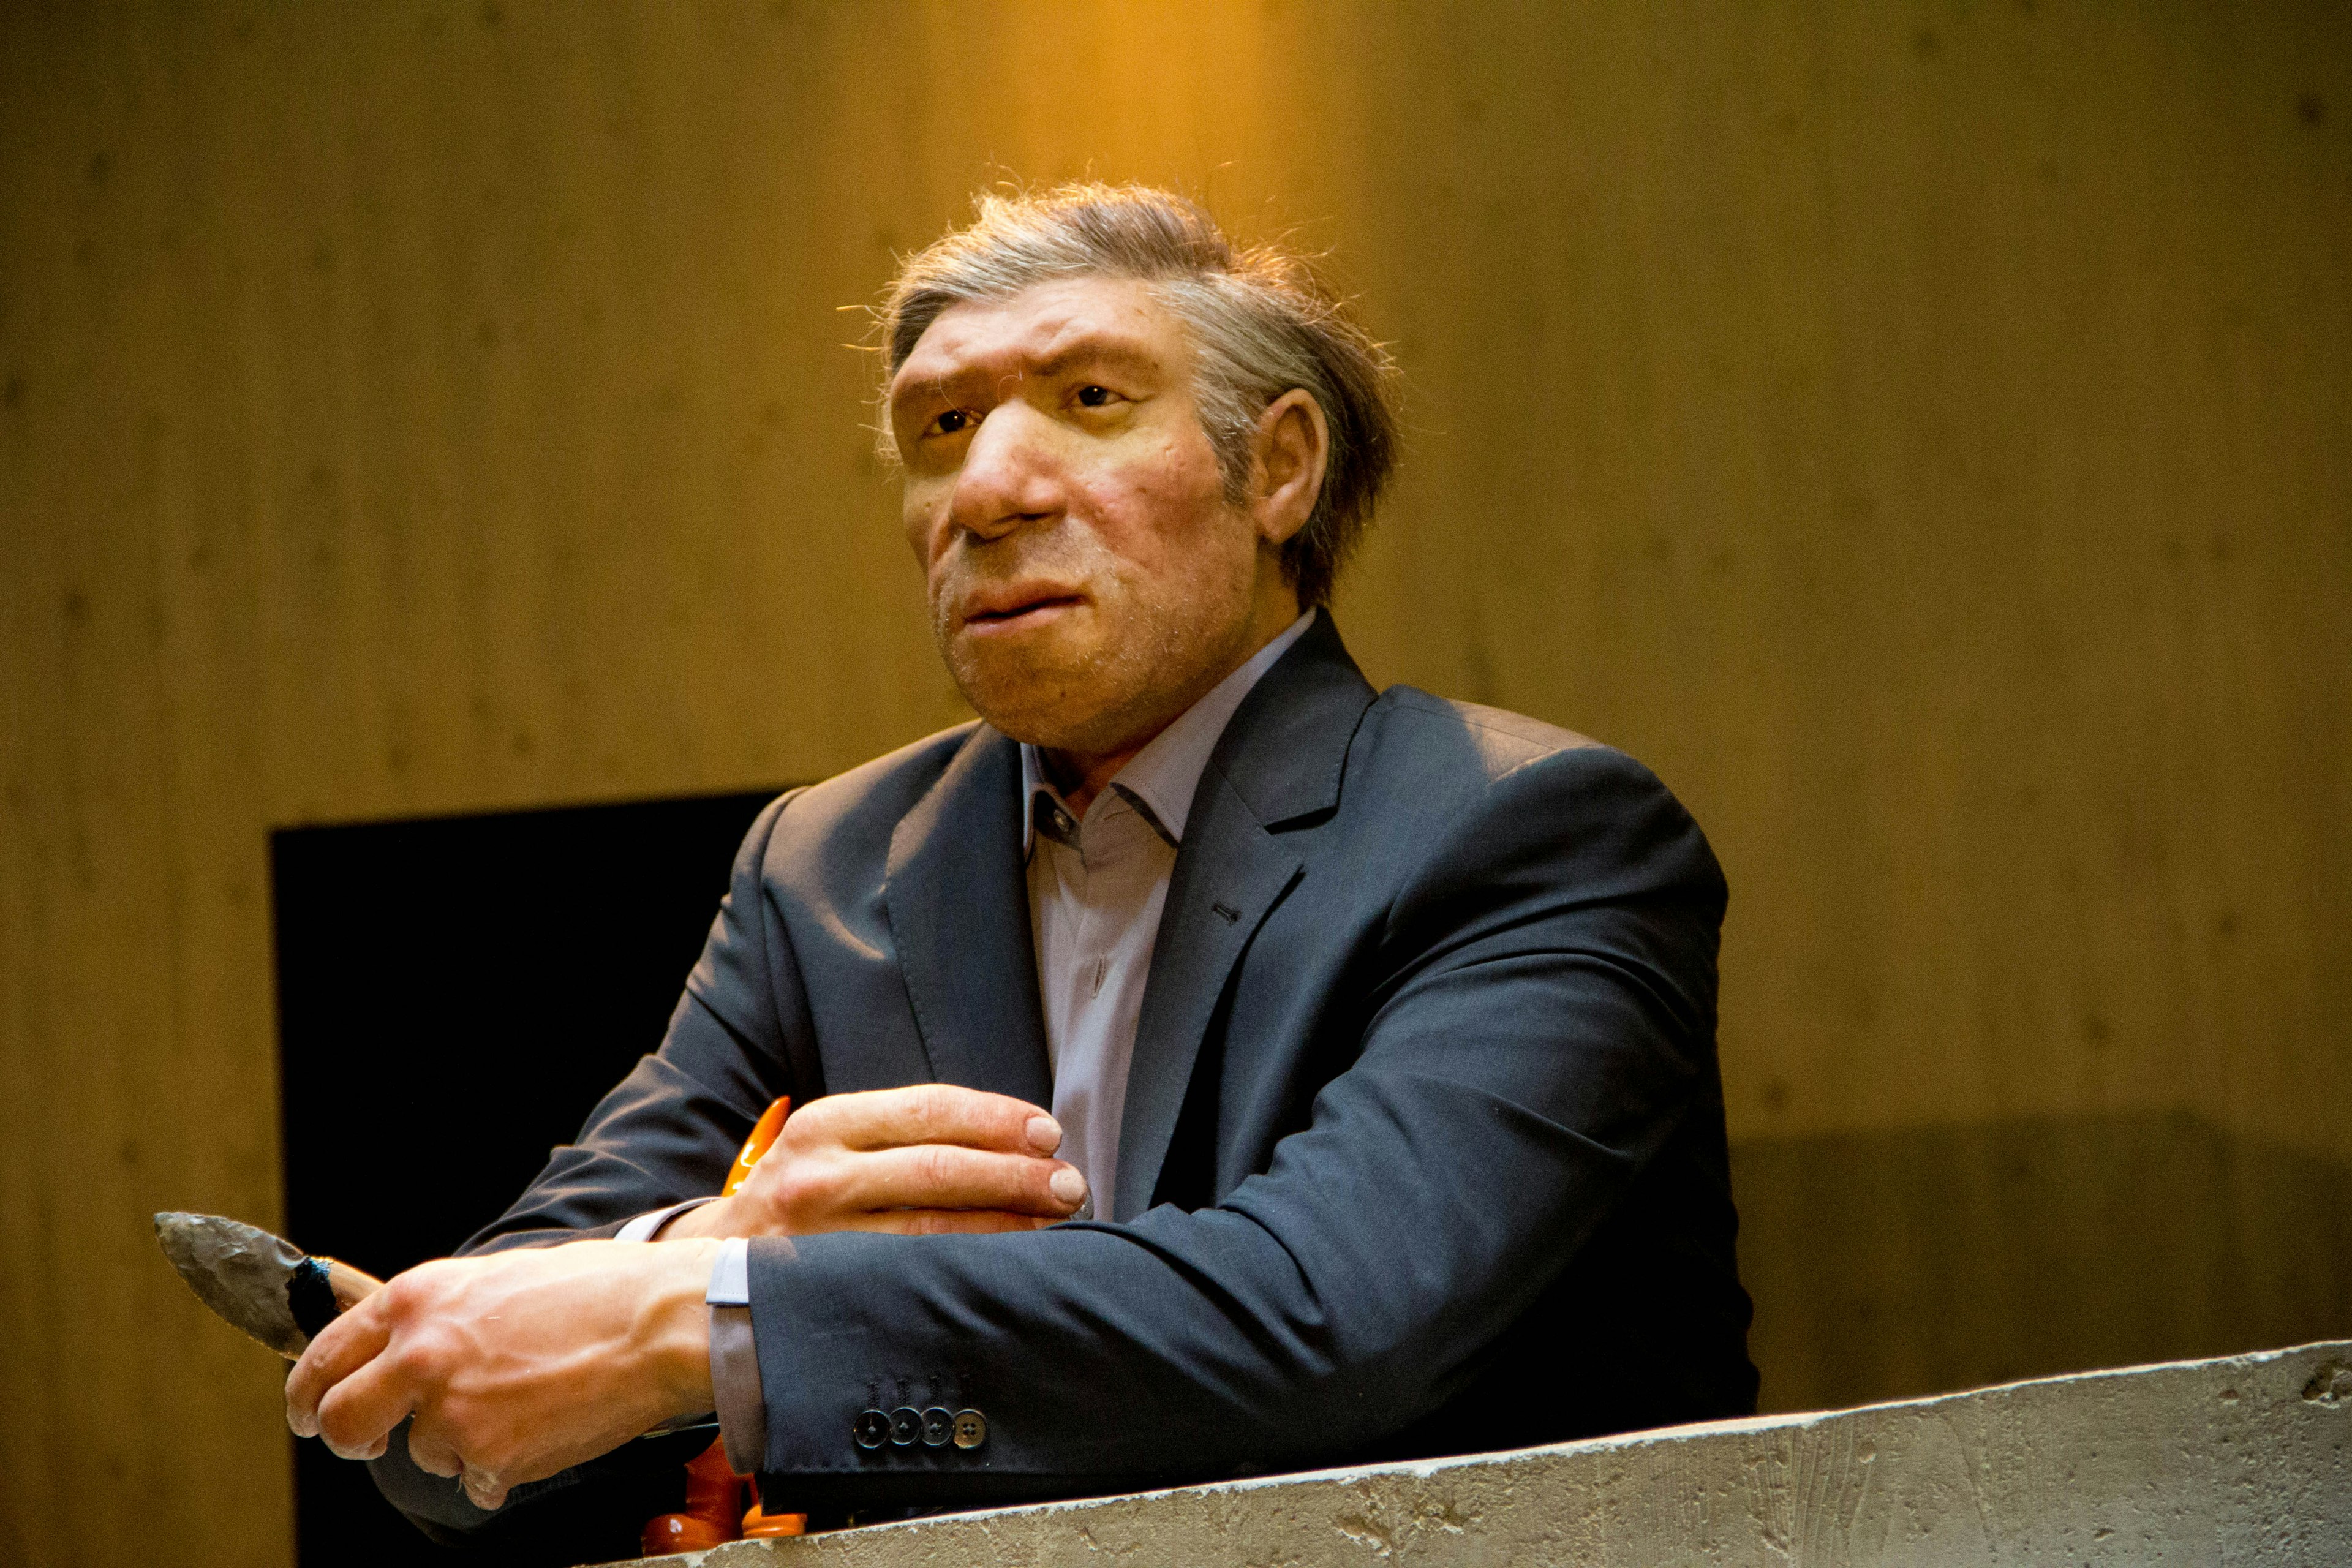 Neanderthal in a business suit at the Neanderthal Museum, Mettmann, Germany